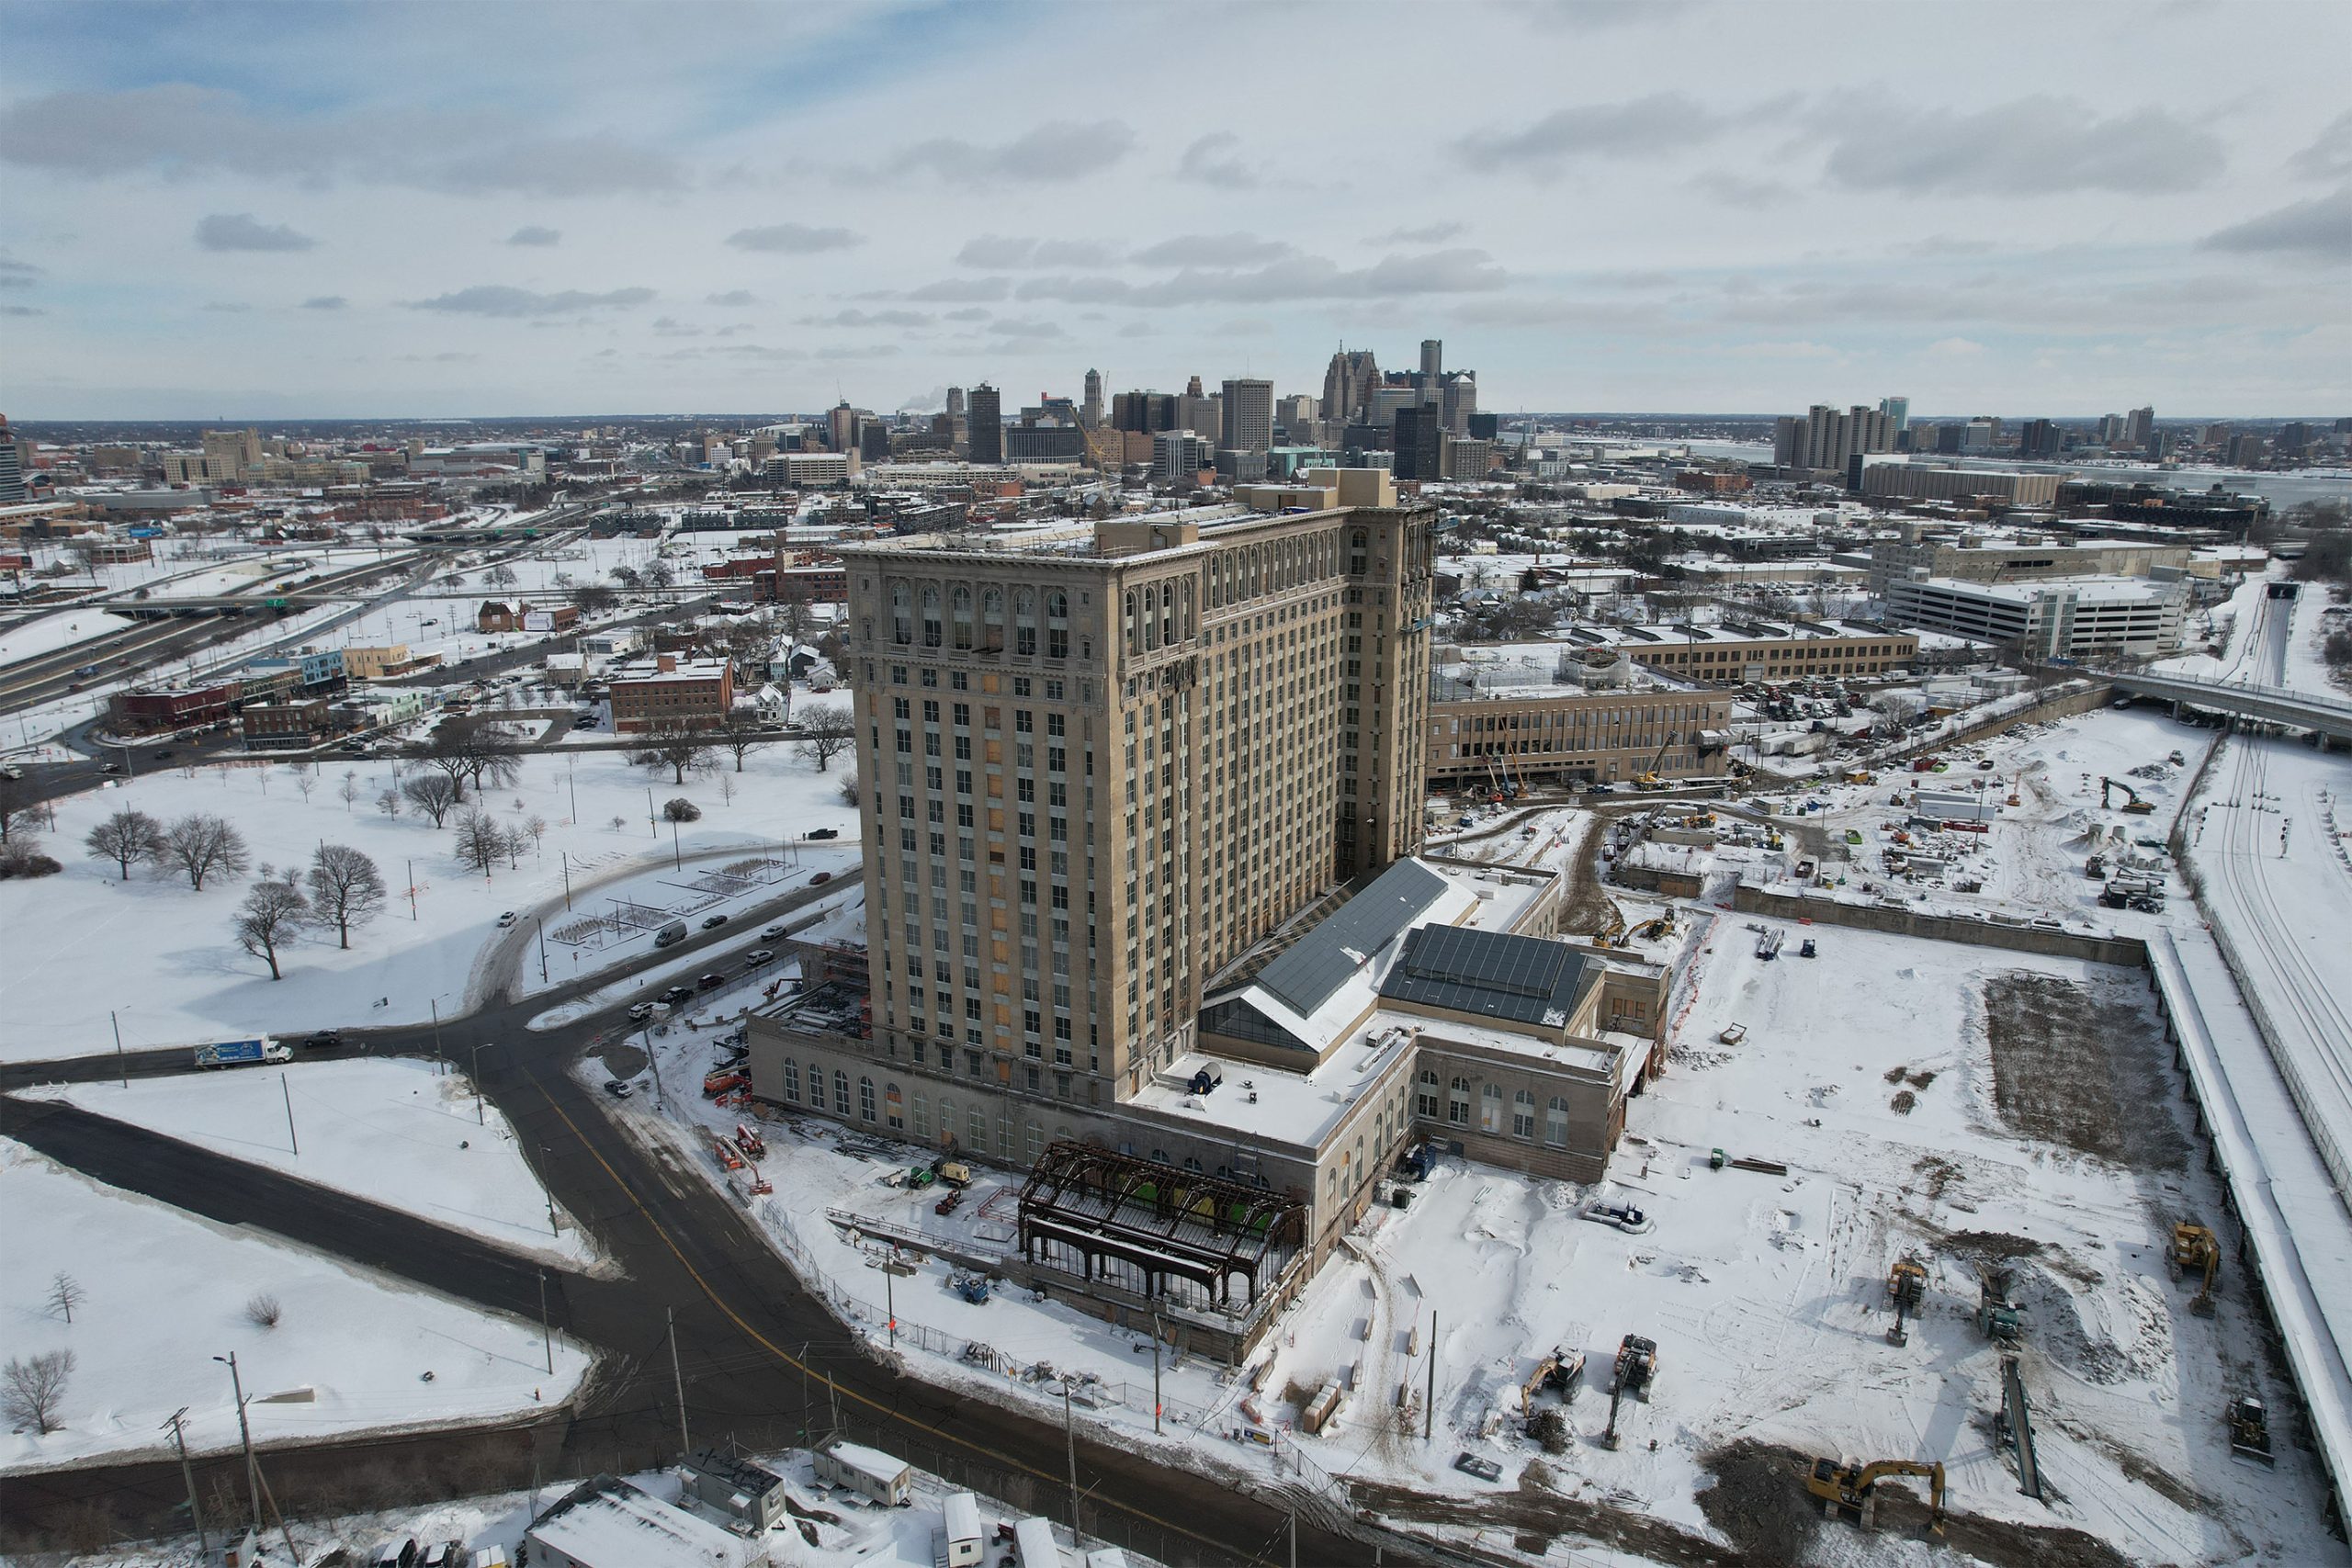 ariel view of Michigan Central Station in winter